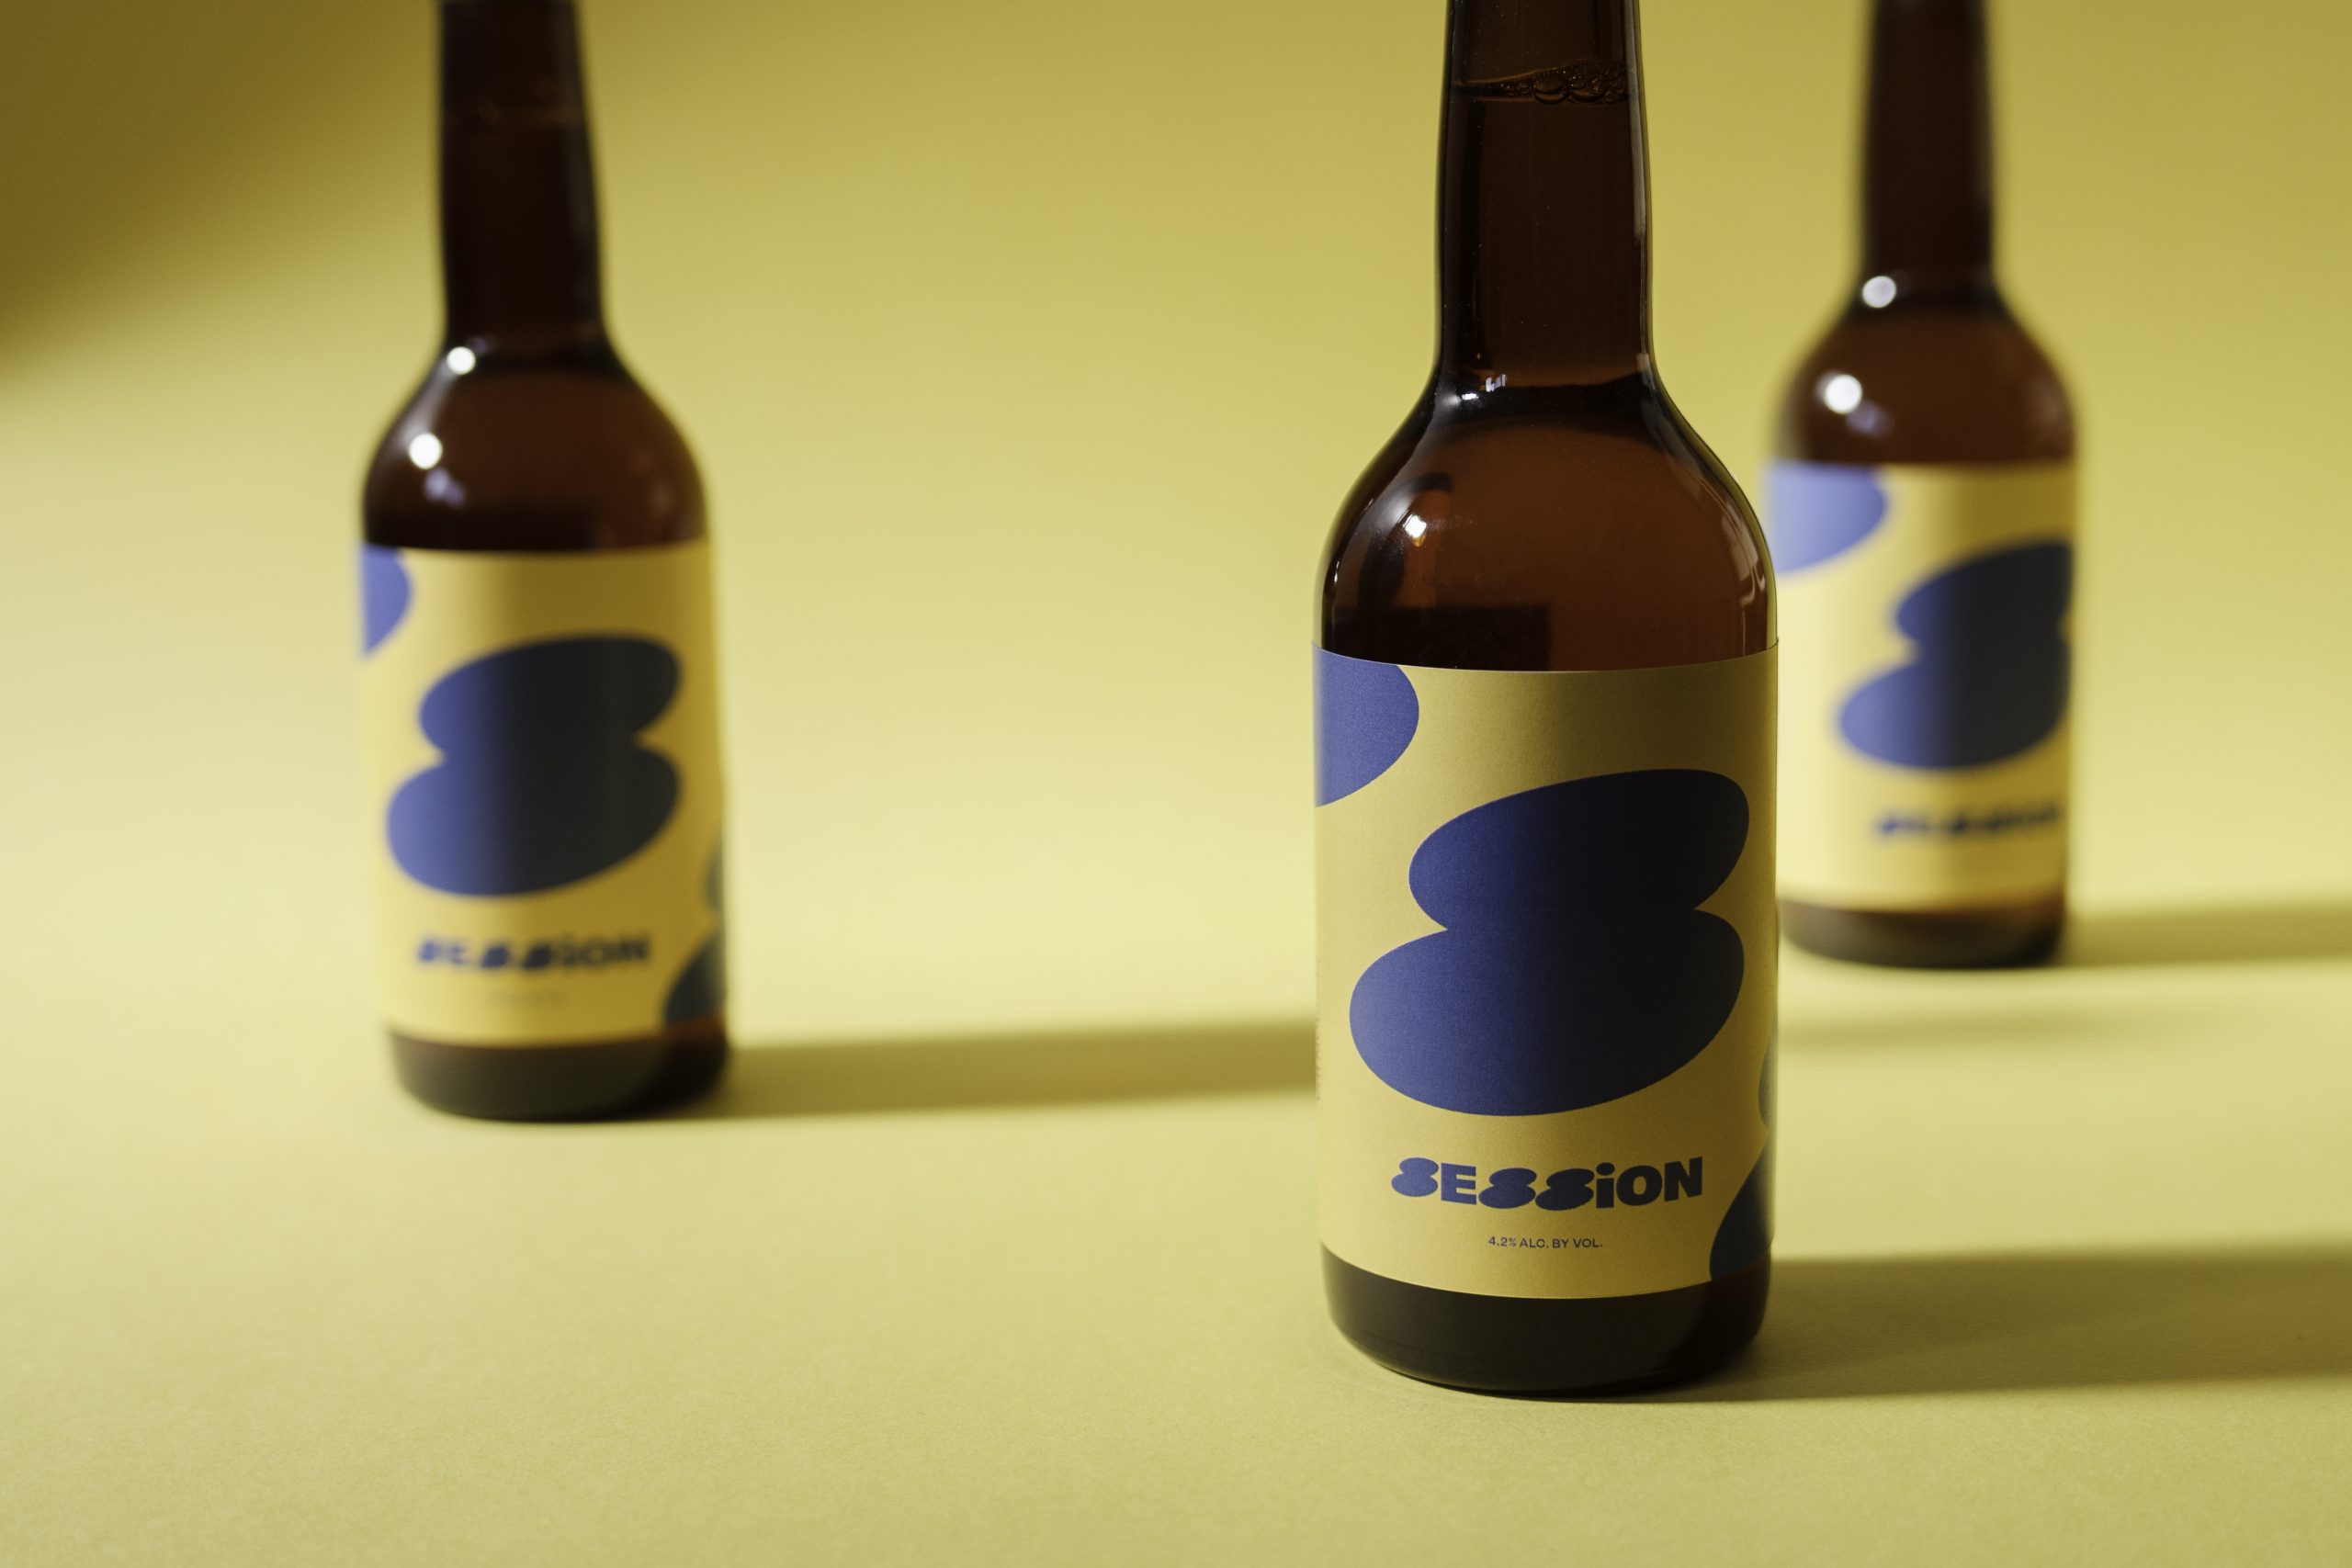 Designer Rui Kinoshita Plays with the Art of Typography in This Funky Abstract Beer Design